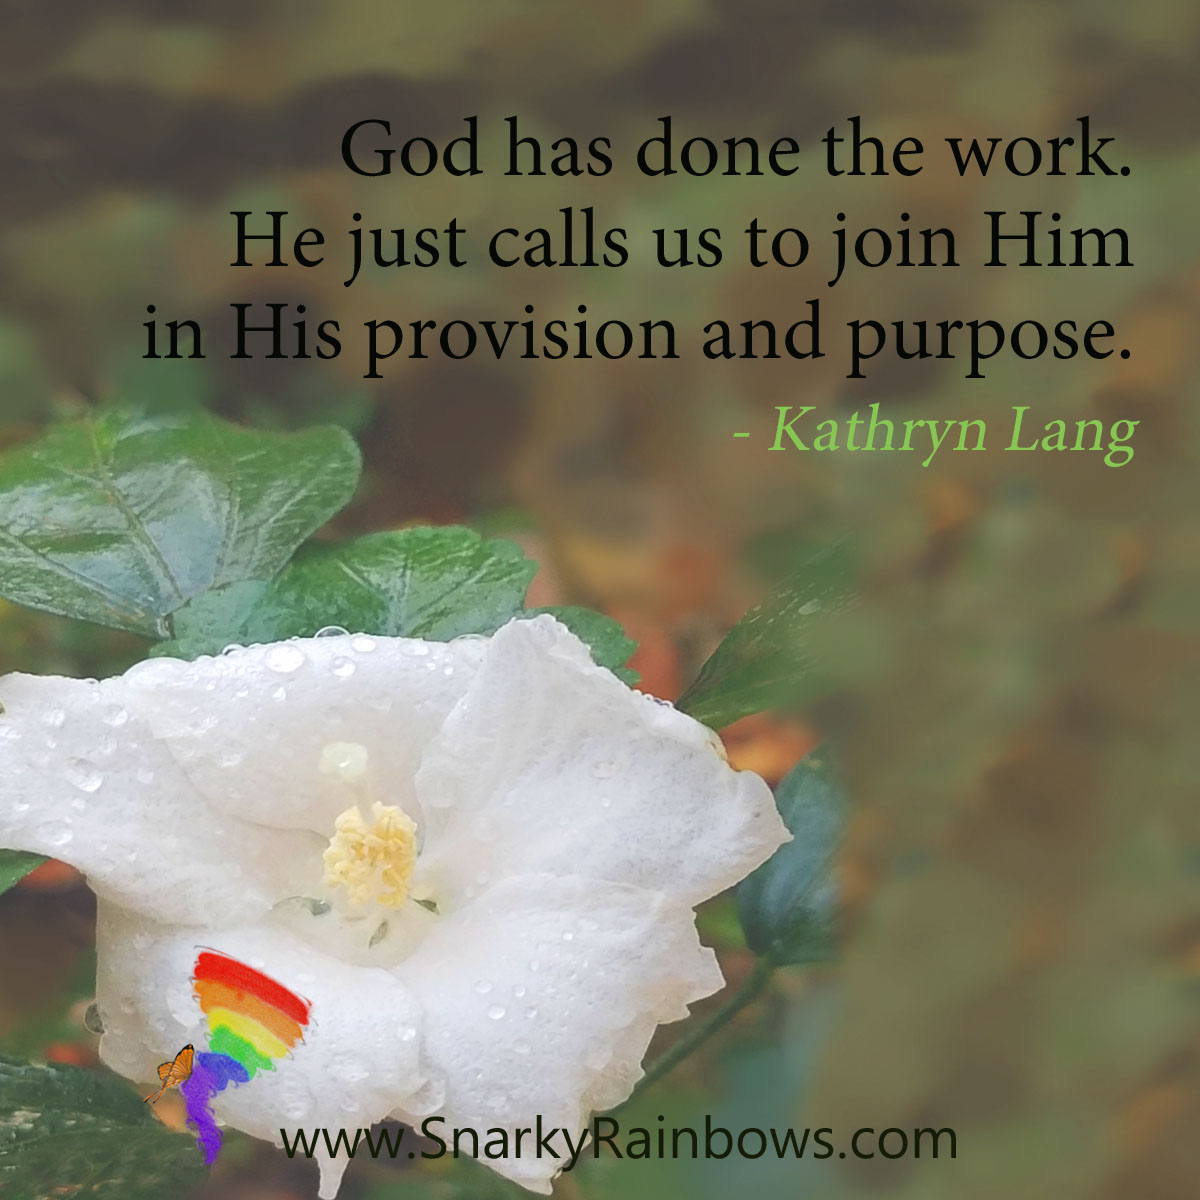 #QuoteoftheDay - God has done the work